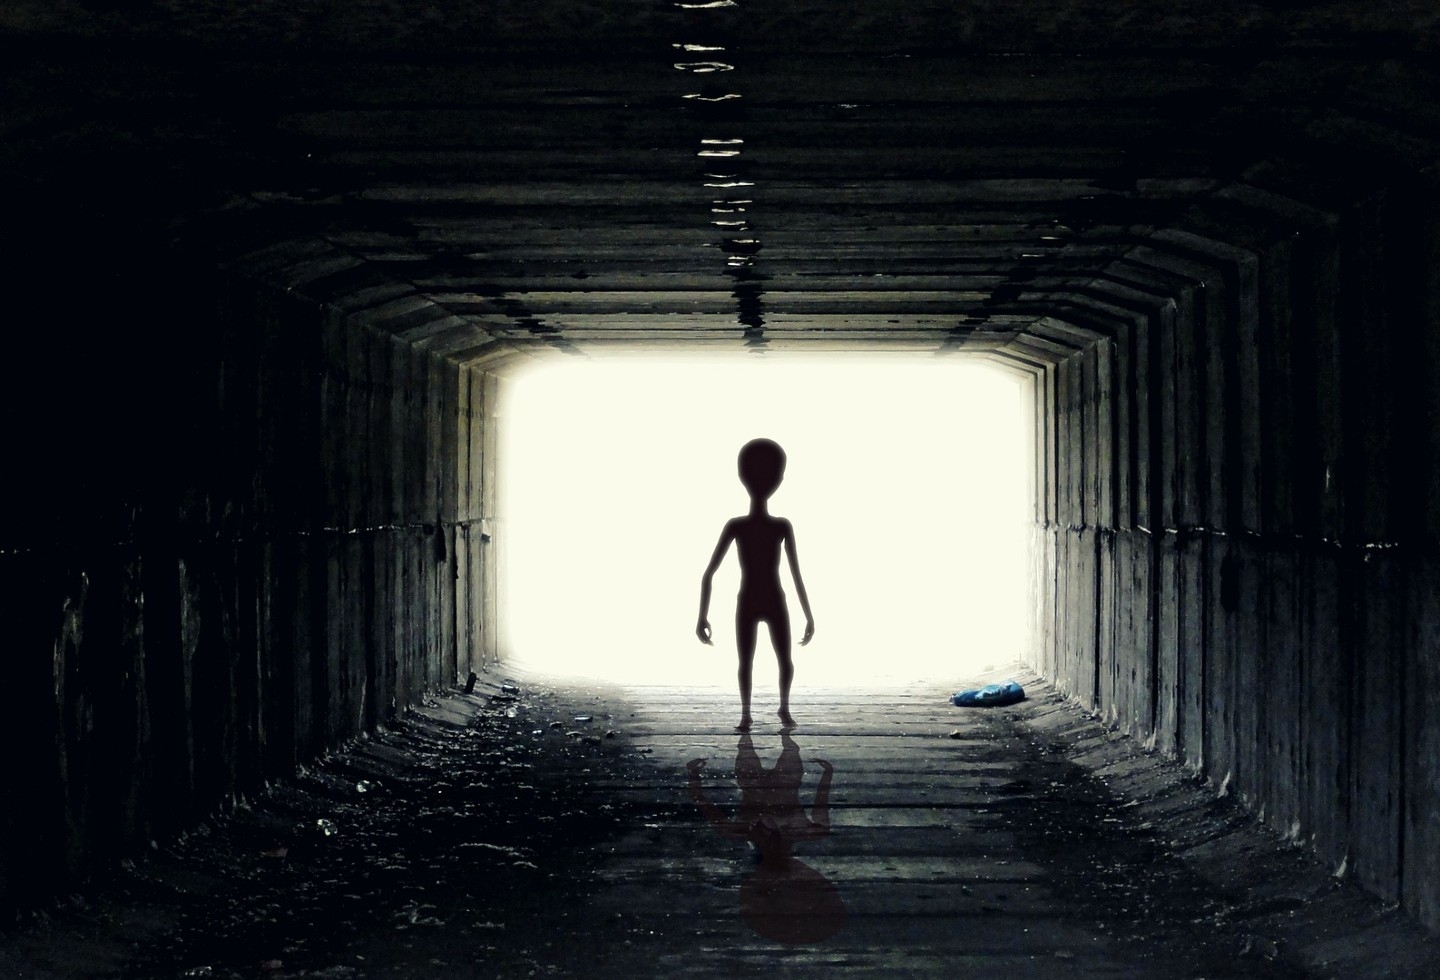 This is the message that NASA scientists seek to send to aliens